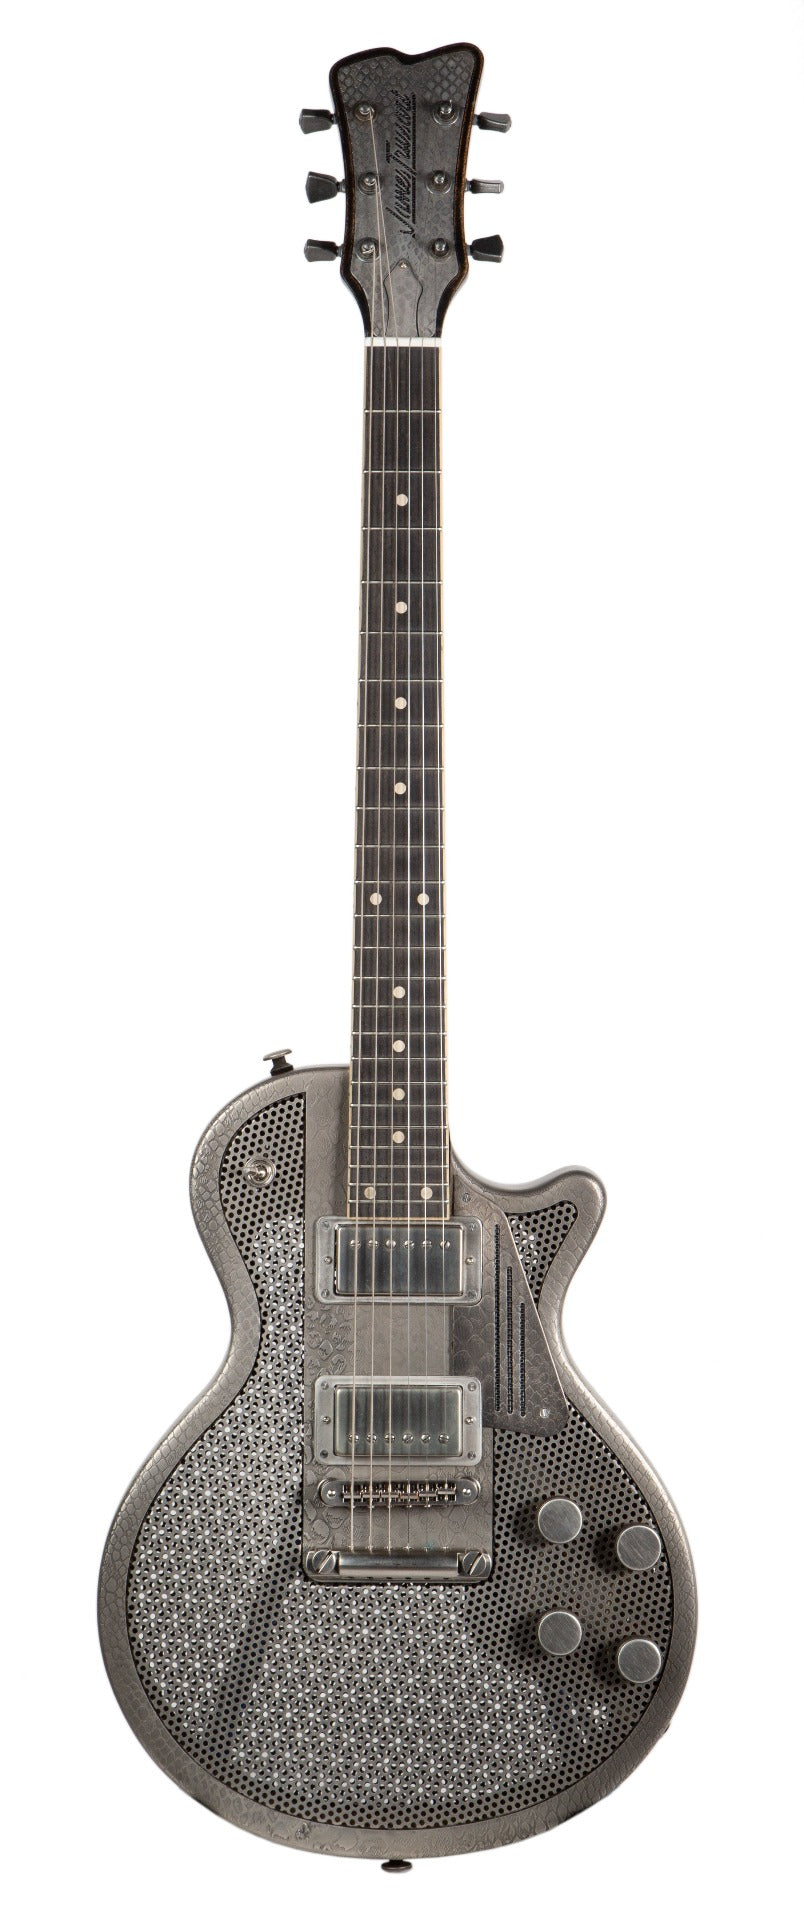 Trussart Steel Deville Electric Guitar in Antique Silver Snakeskin with Case